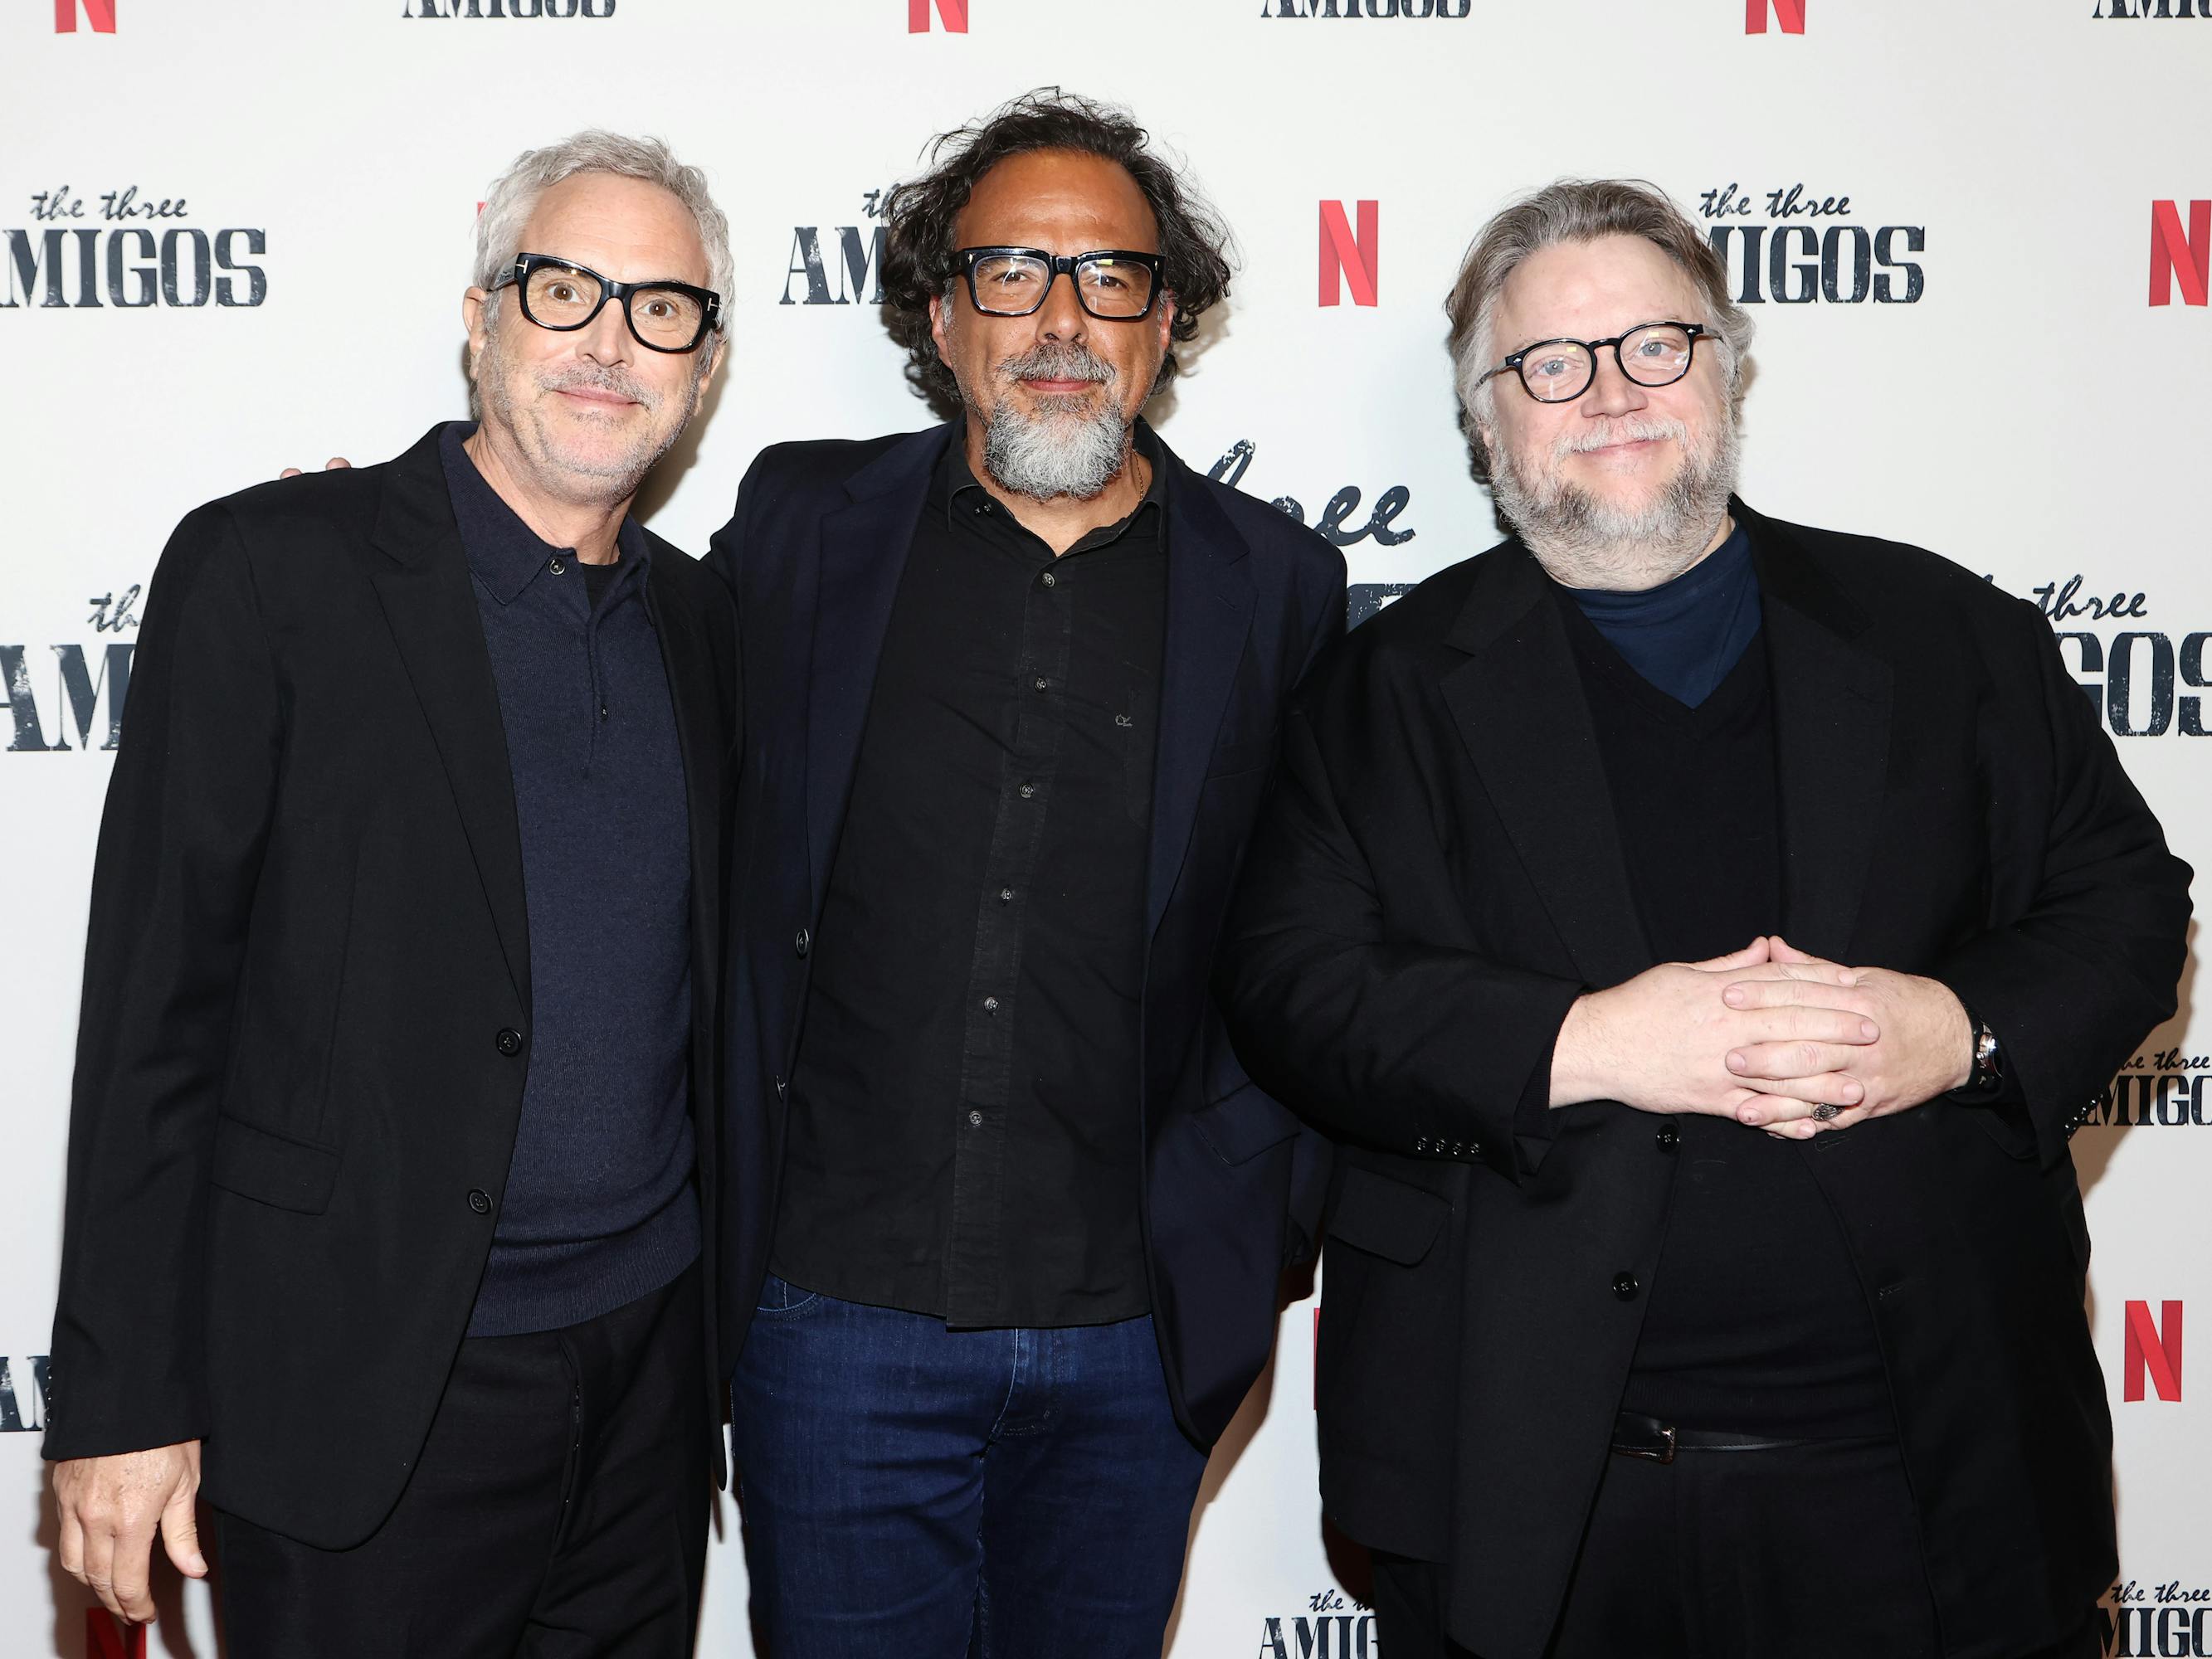 Alfonso Cuarón, Alejandro Iñárritu, and Guillermo del Toro stand together on a red carpet wearing black glasses in various degrees of chunkiness. The step-and-repeat background features the Netflix icon, and 'the three Amigos' in faded black font.